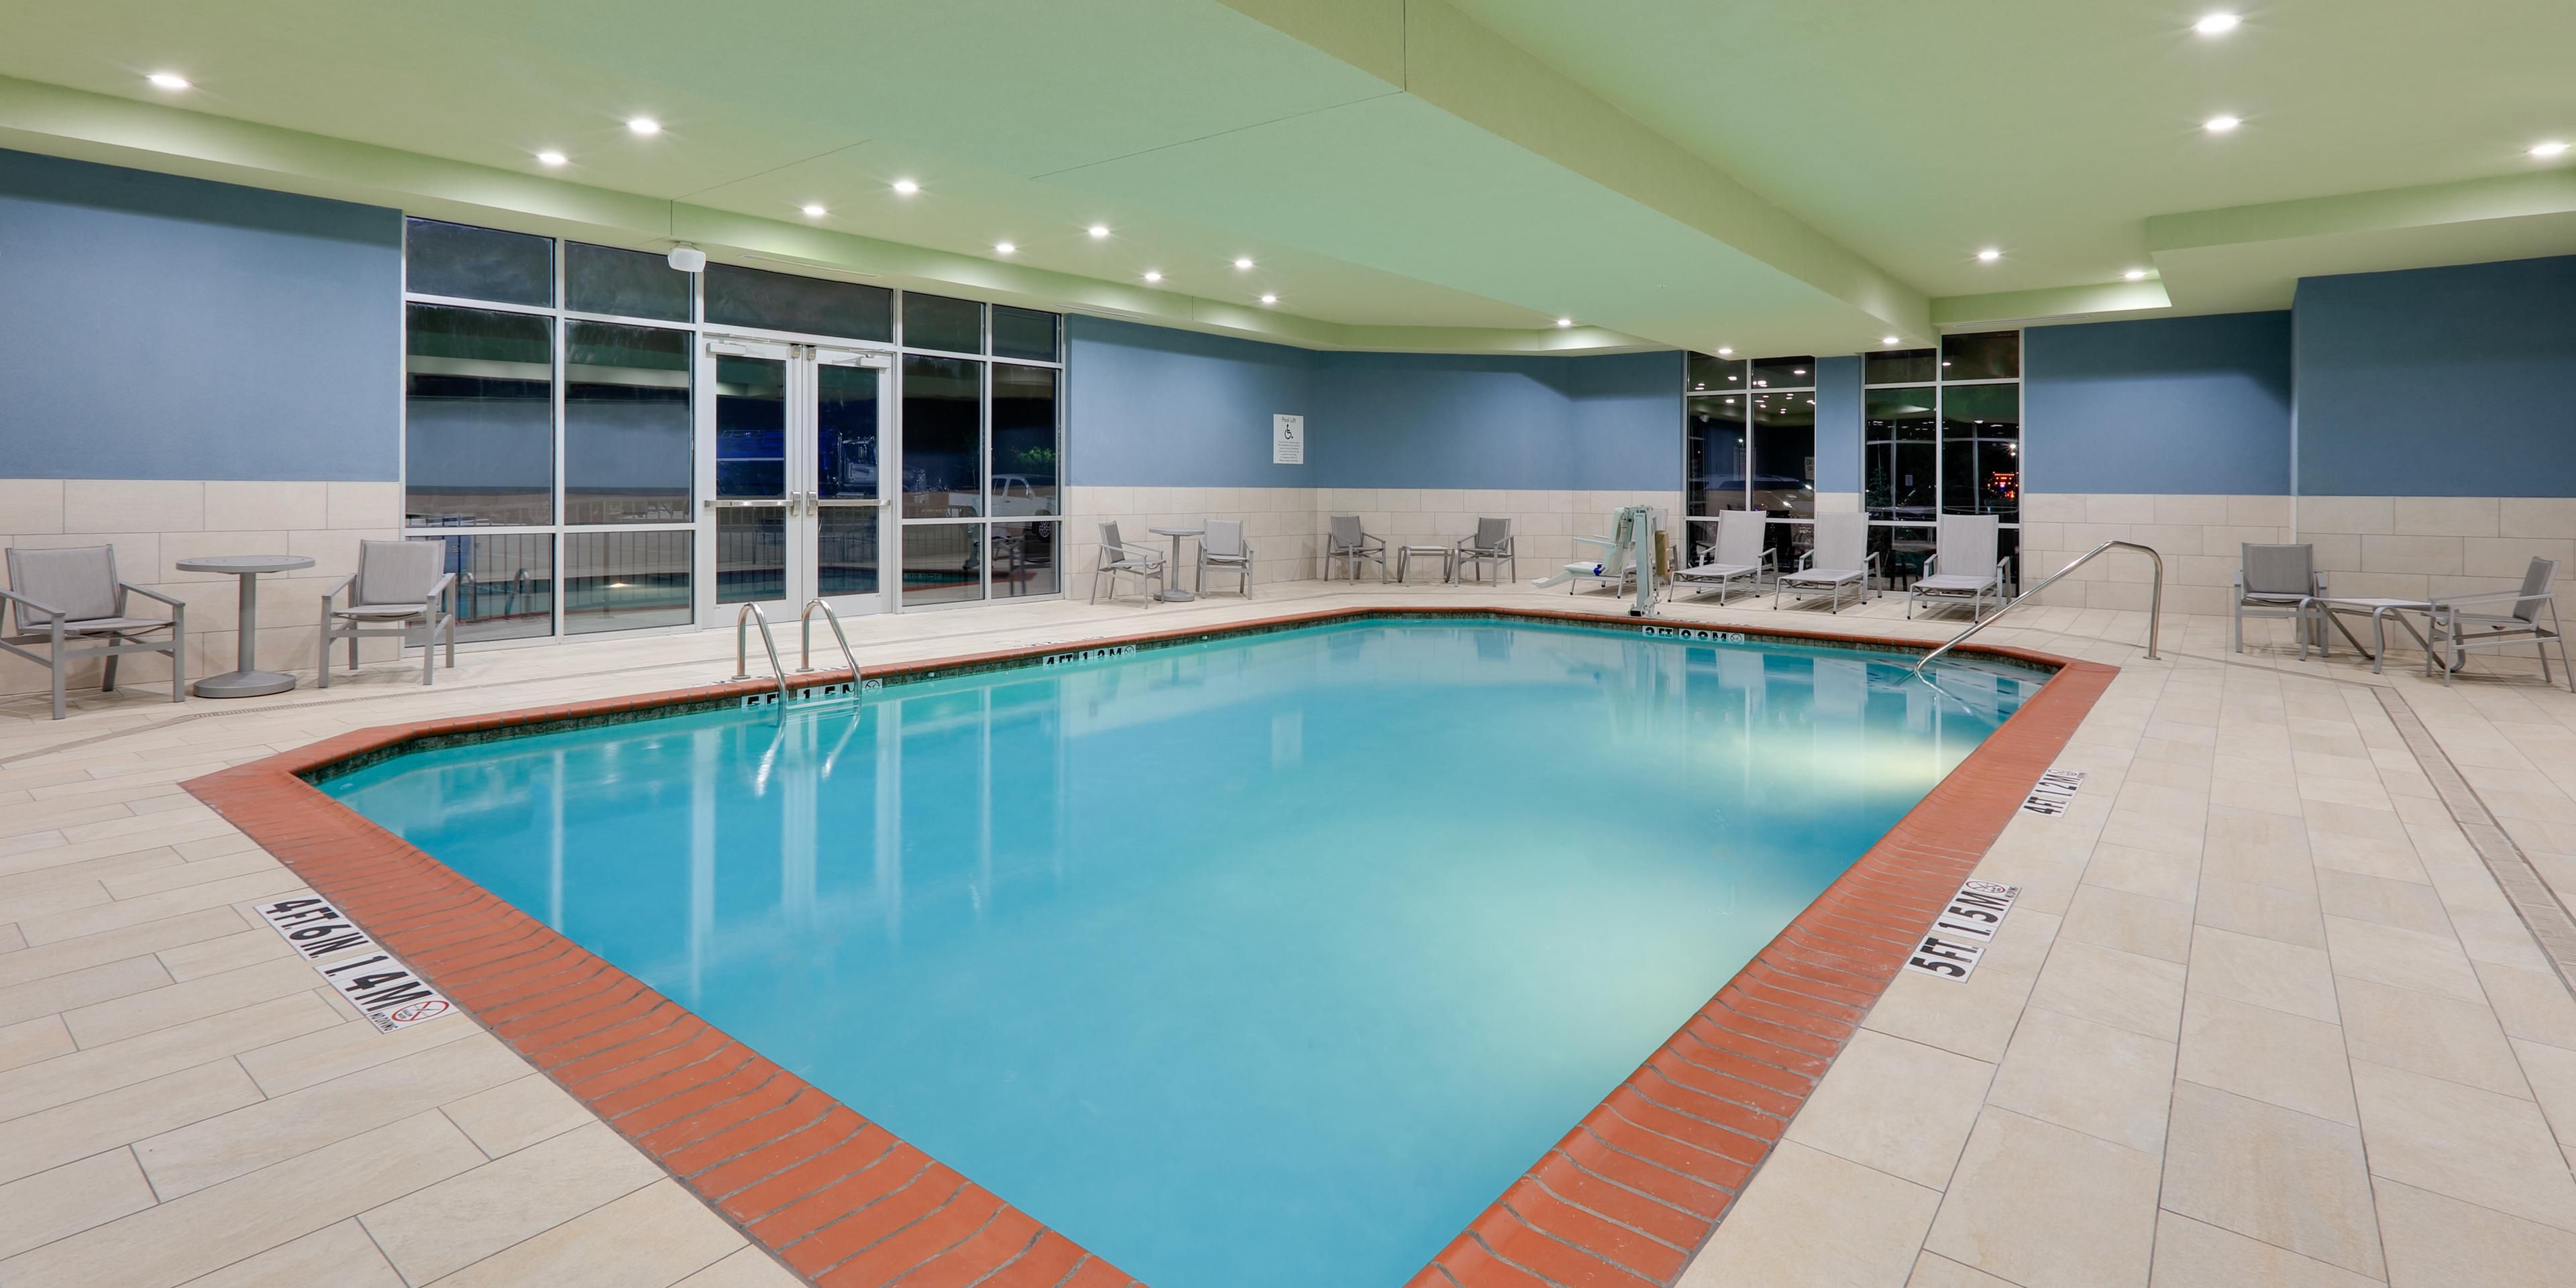 Guests are encouraged to enjoy our heated indoor pool all year! Pool hours are from 8:00 AM - 10:00 PM. 